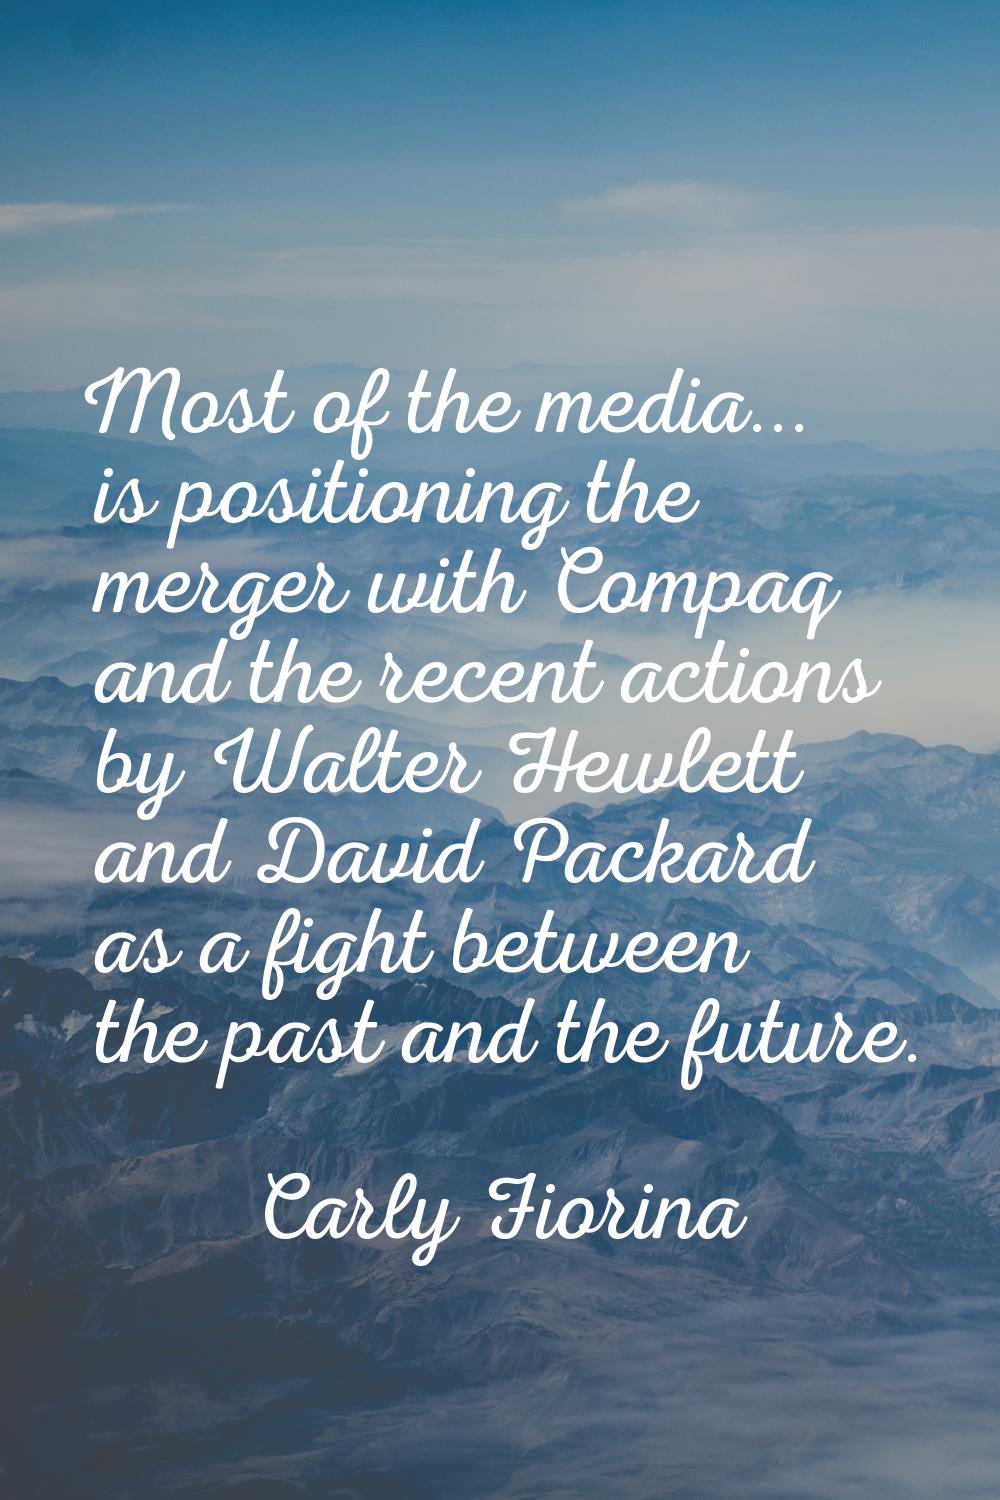 Most of the media... is positioning the merger with Compaq and the recent actions by Walter Hewlett